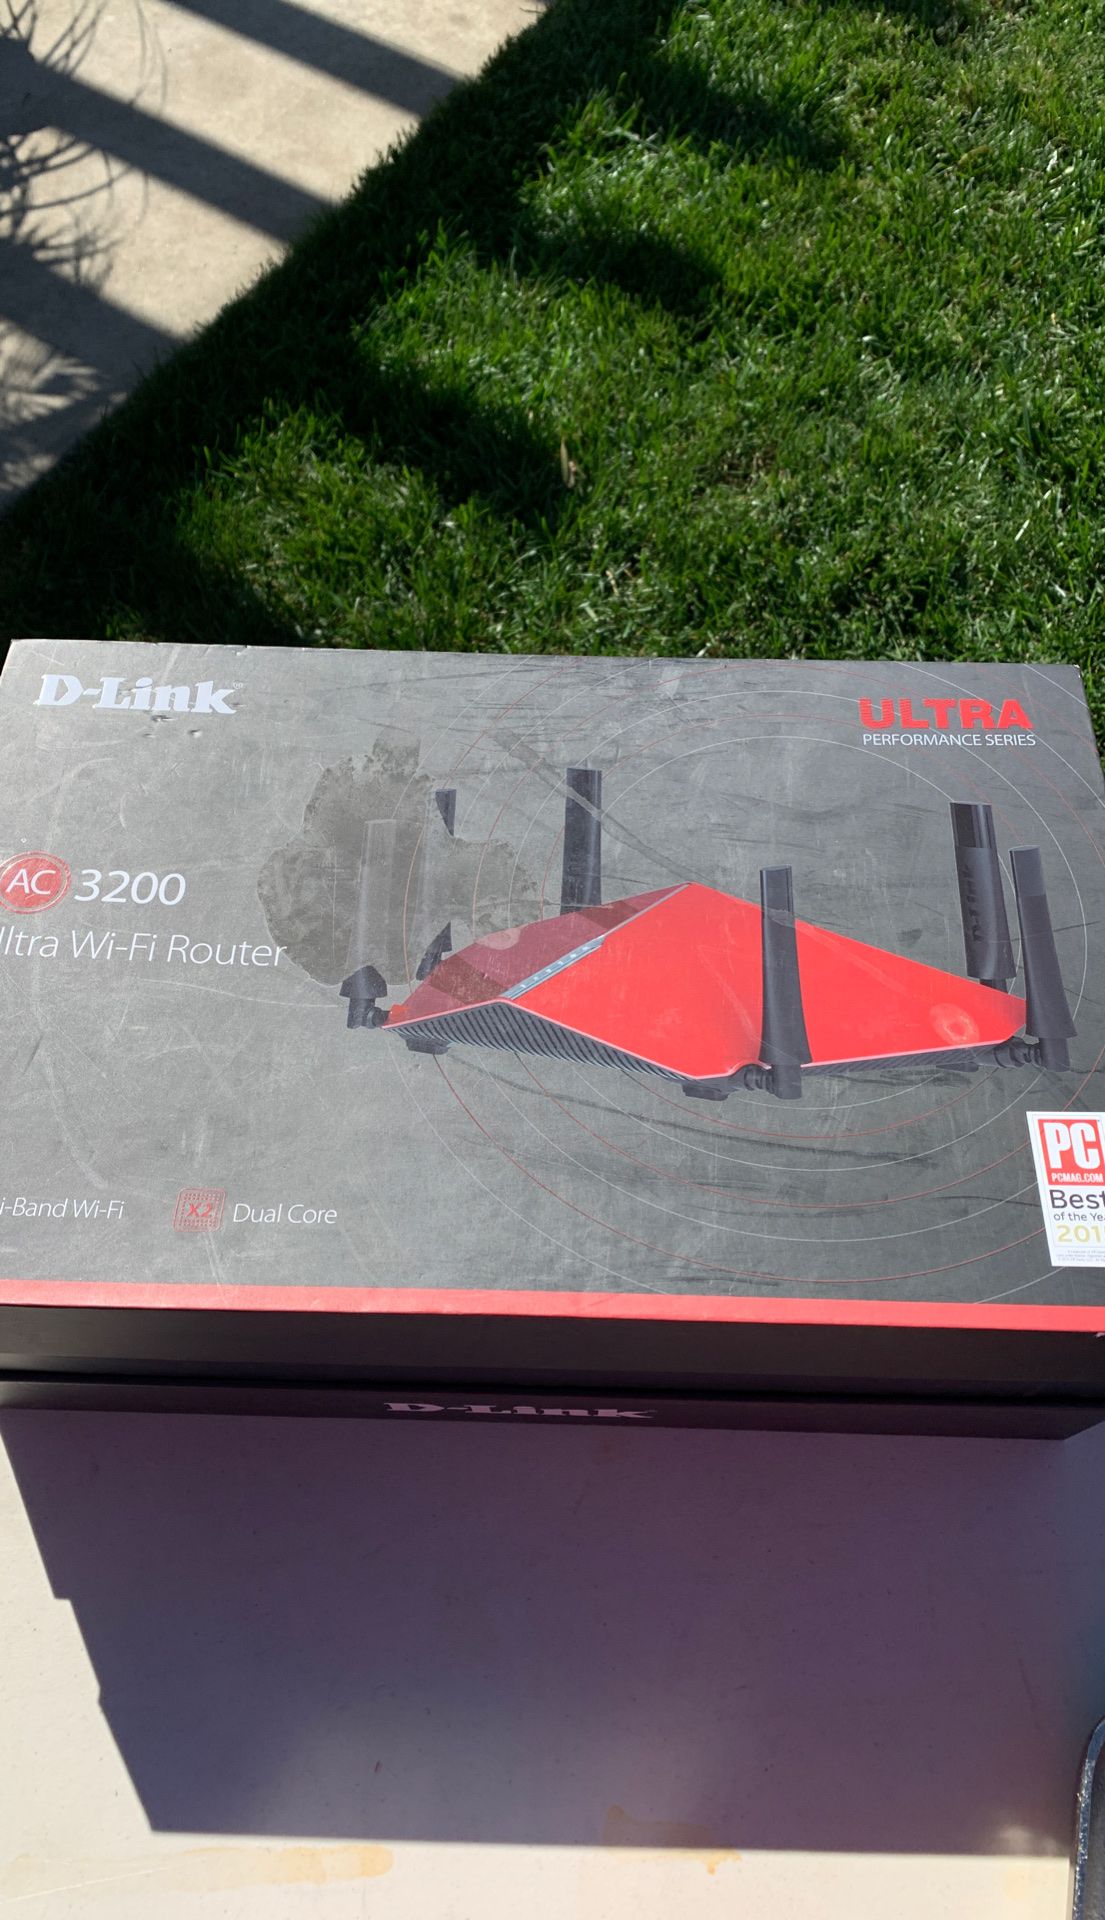 Dlink WiFi router